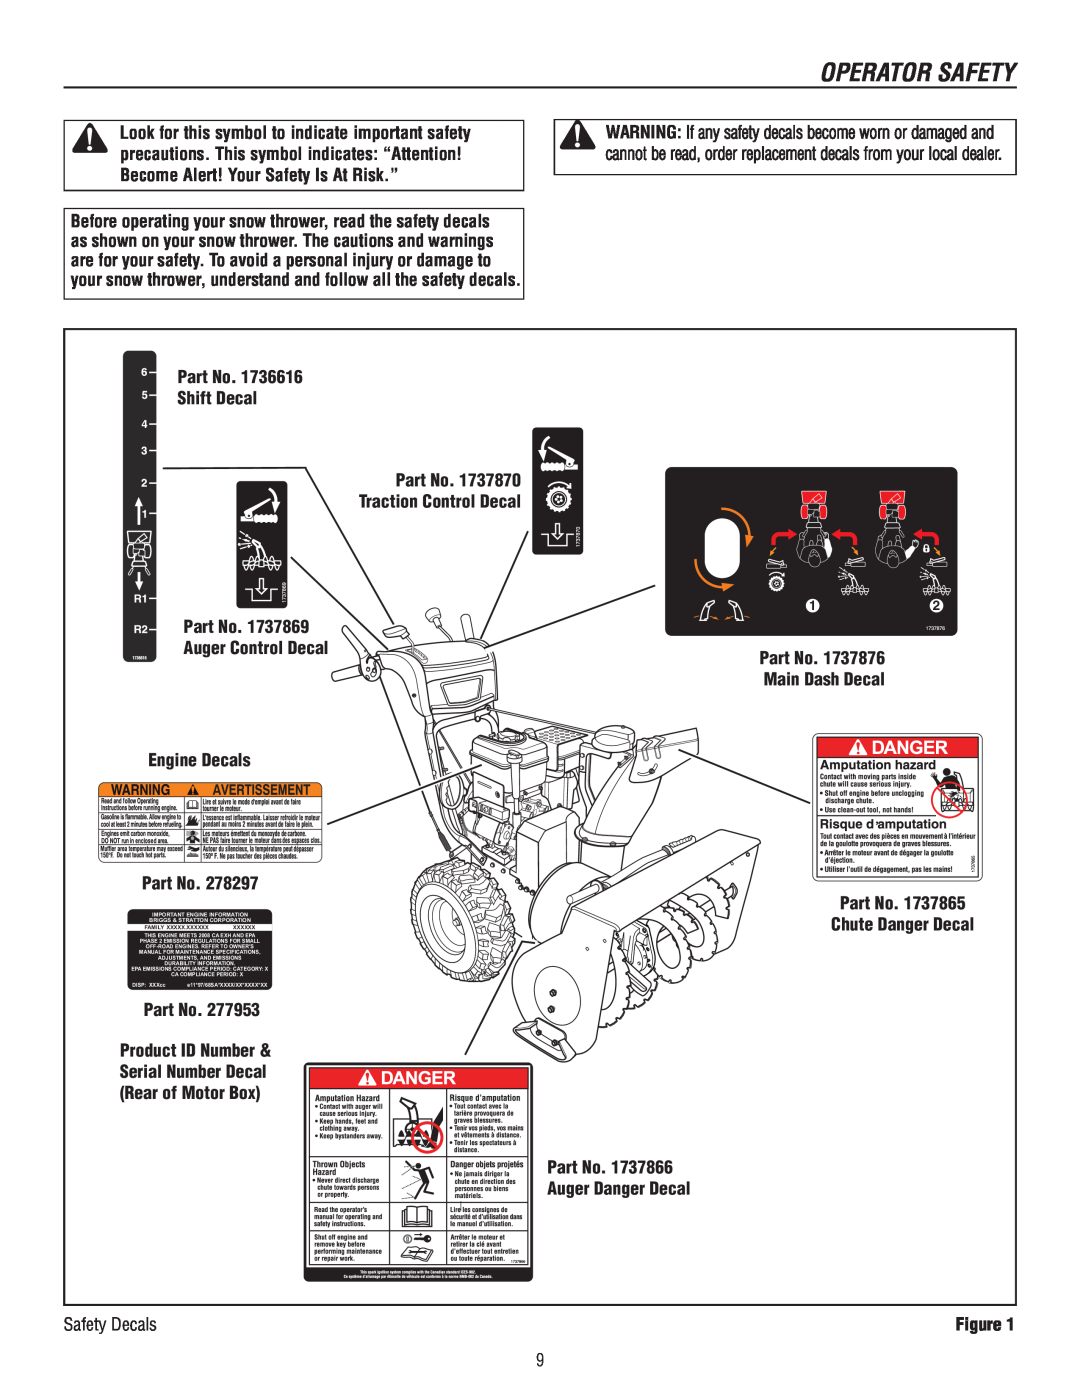 Murray 1737920 Operator Safety, Chute Danger Decal, Traction Control Decal, Engine Decals, Important Engine Information 